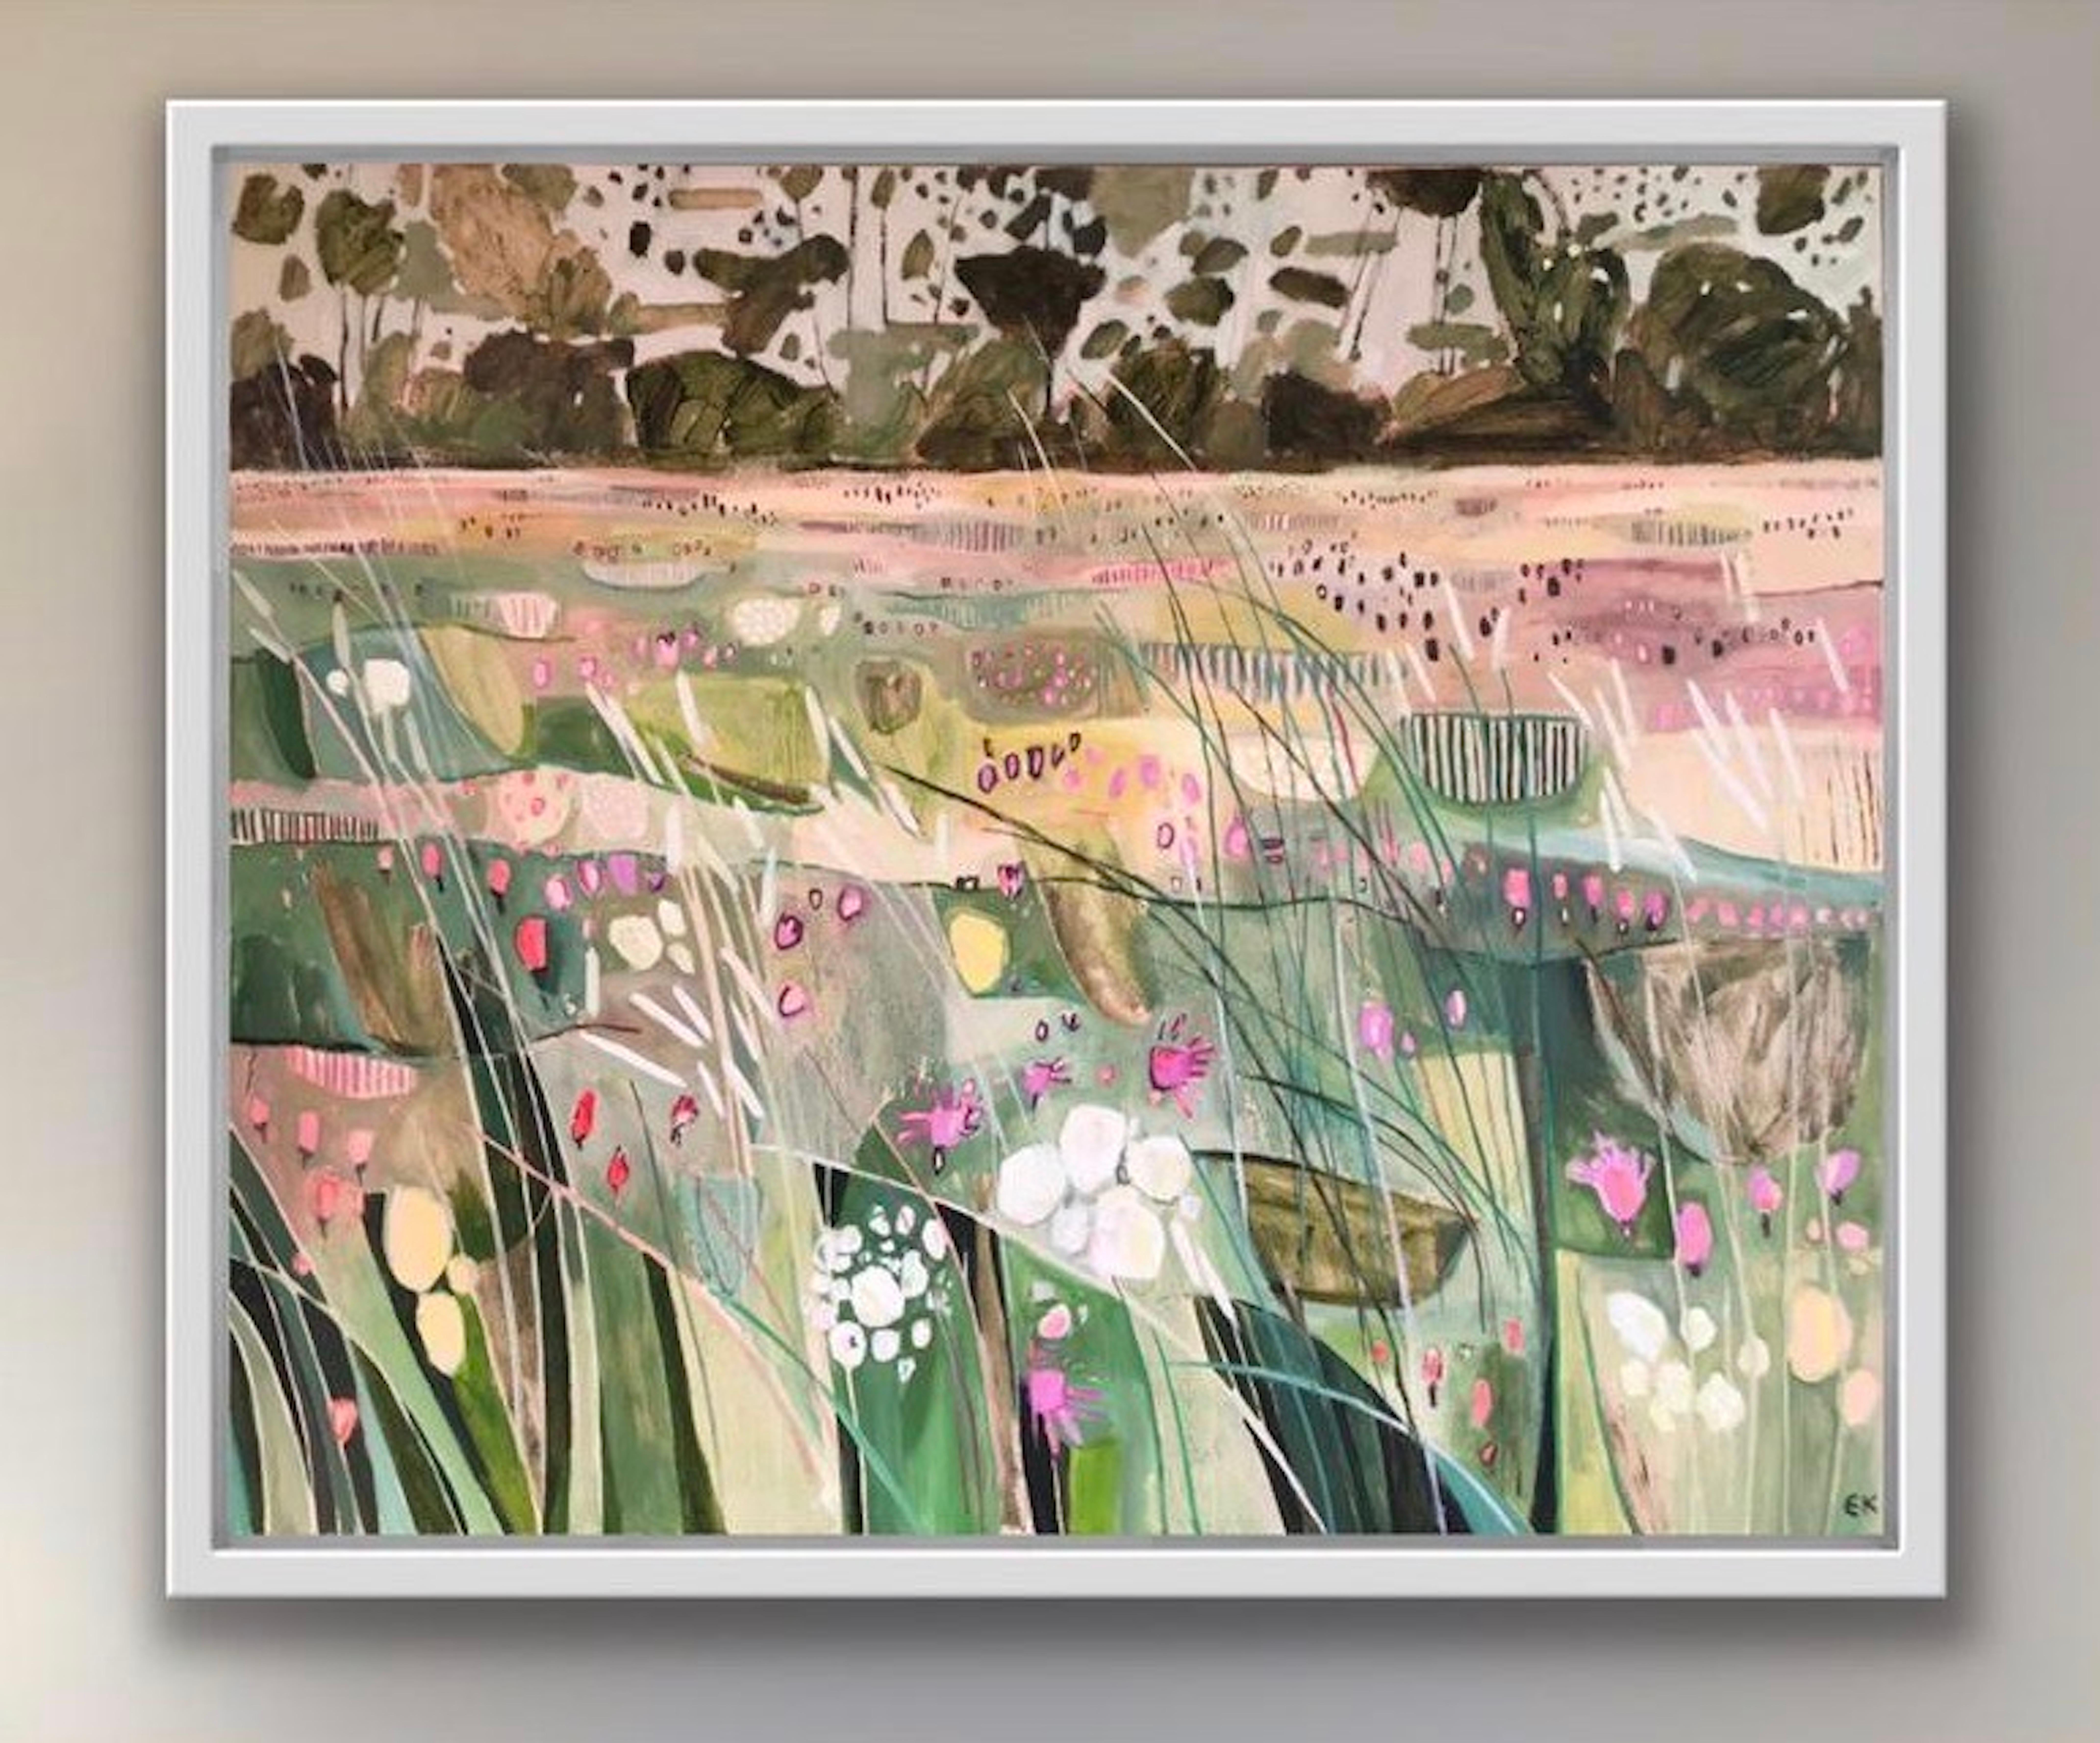 Hinksey Meadow with Tall Grasses, landscape, floral, Oxford, Cotswolds, meadows - Painting by Elaine Kazimierczuk